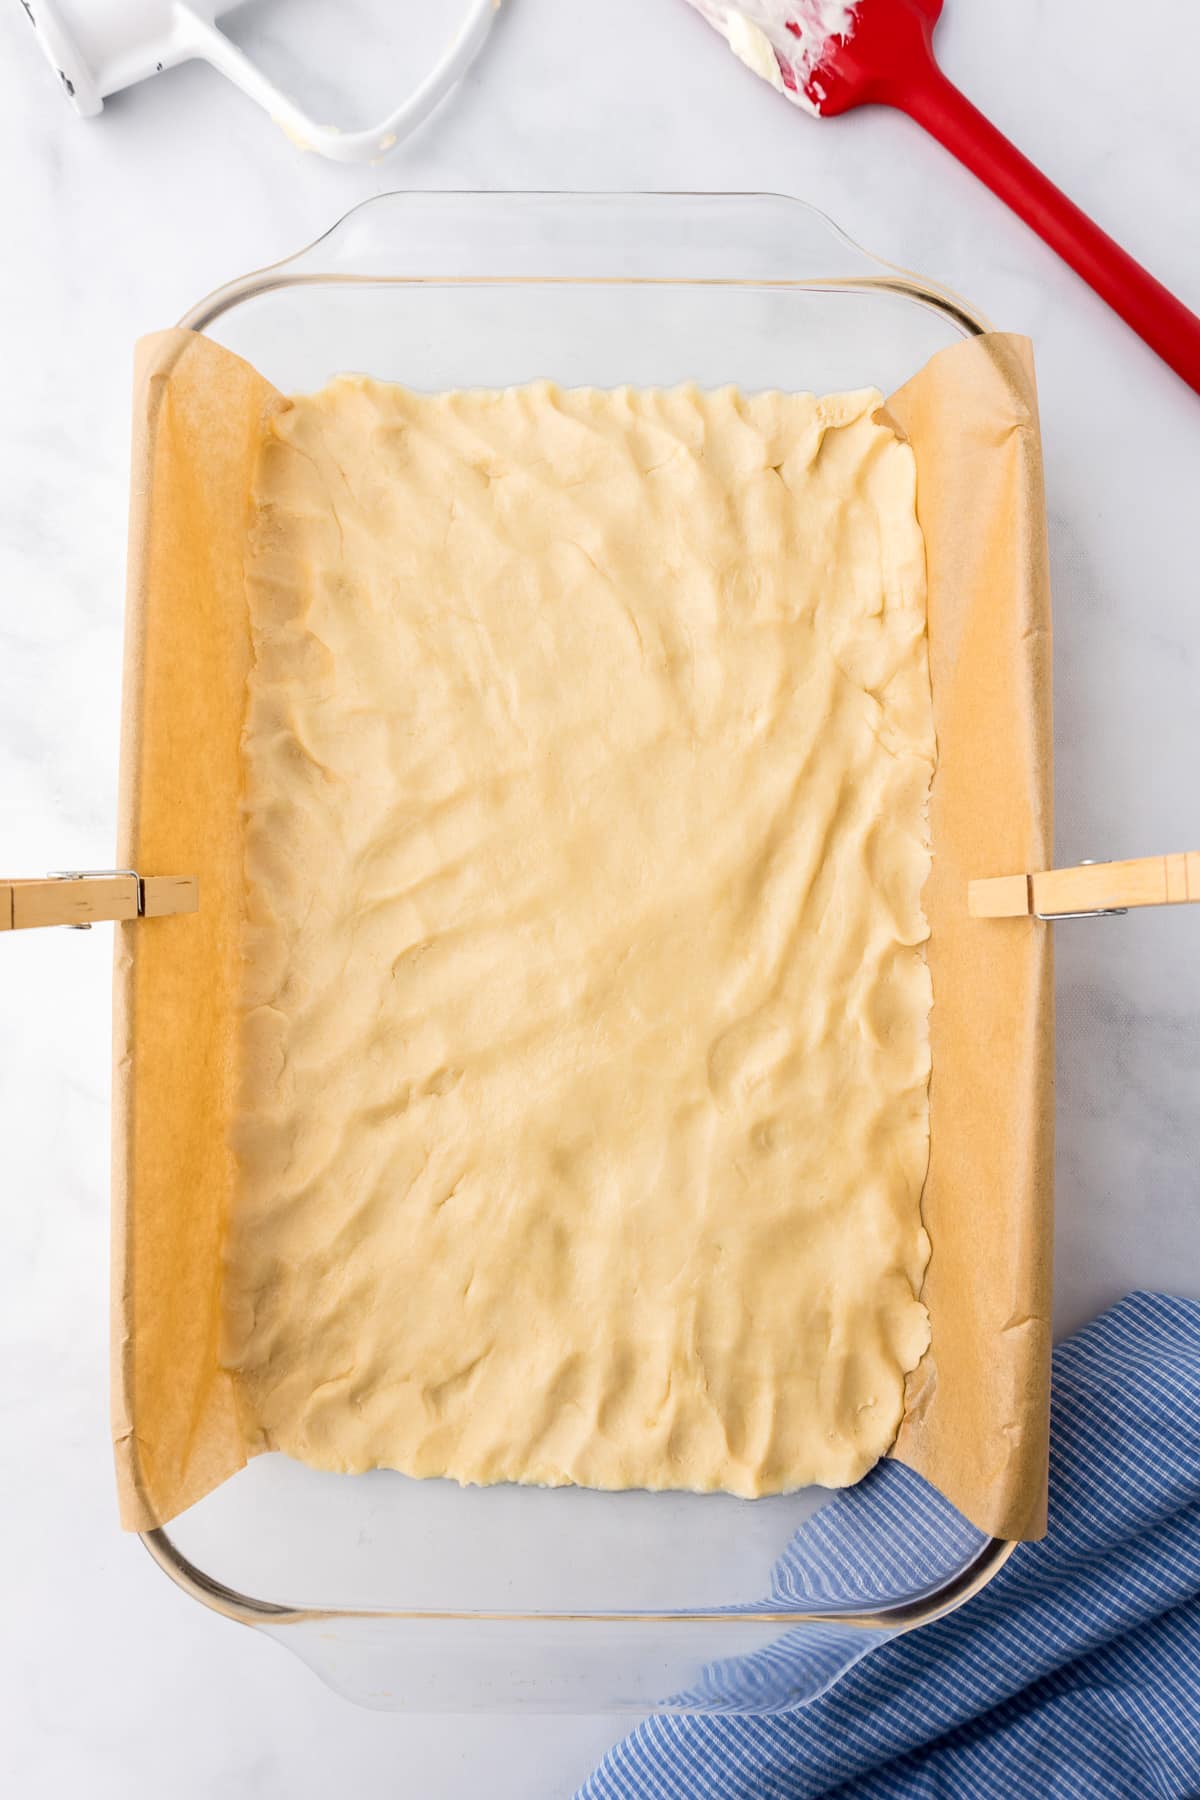 Dough for the crust pressed into a parchment lined glass baking dish. Clothespins hold the parchment paper steady.